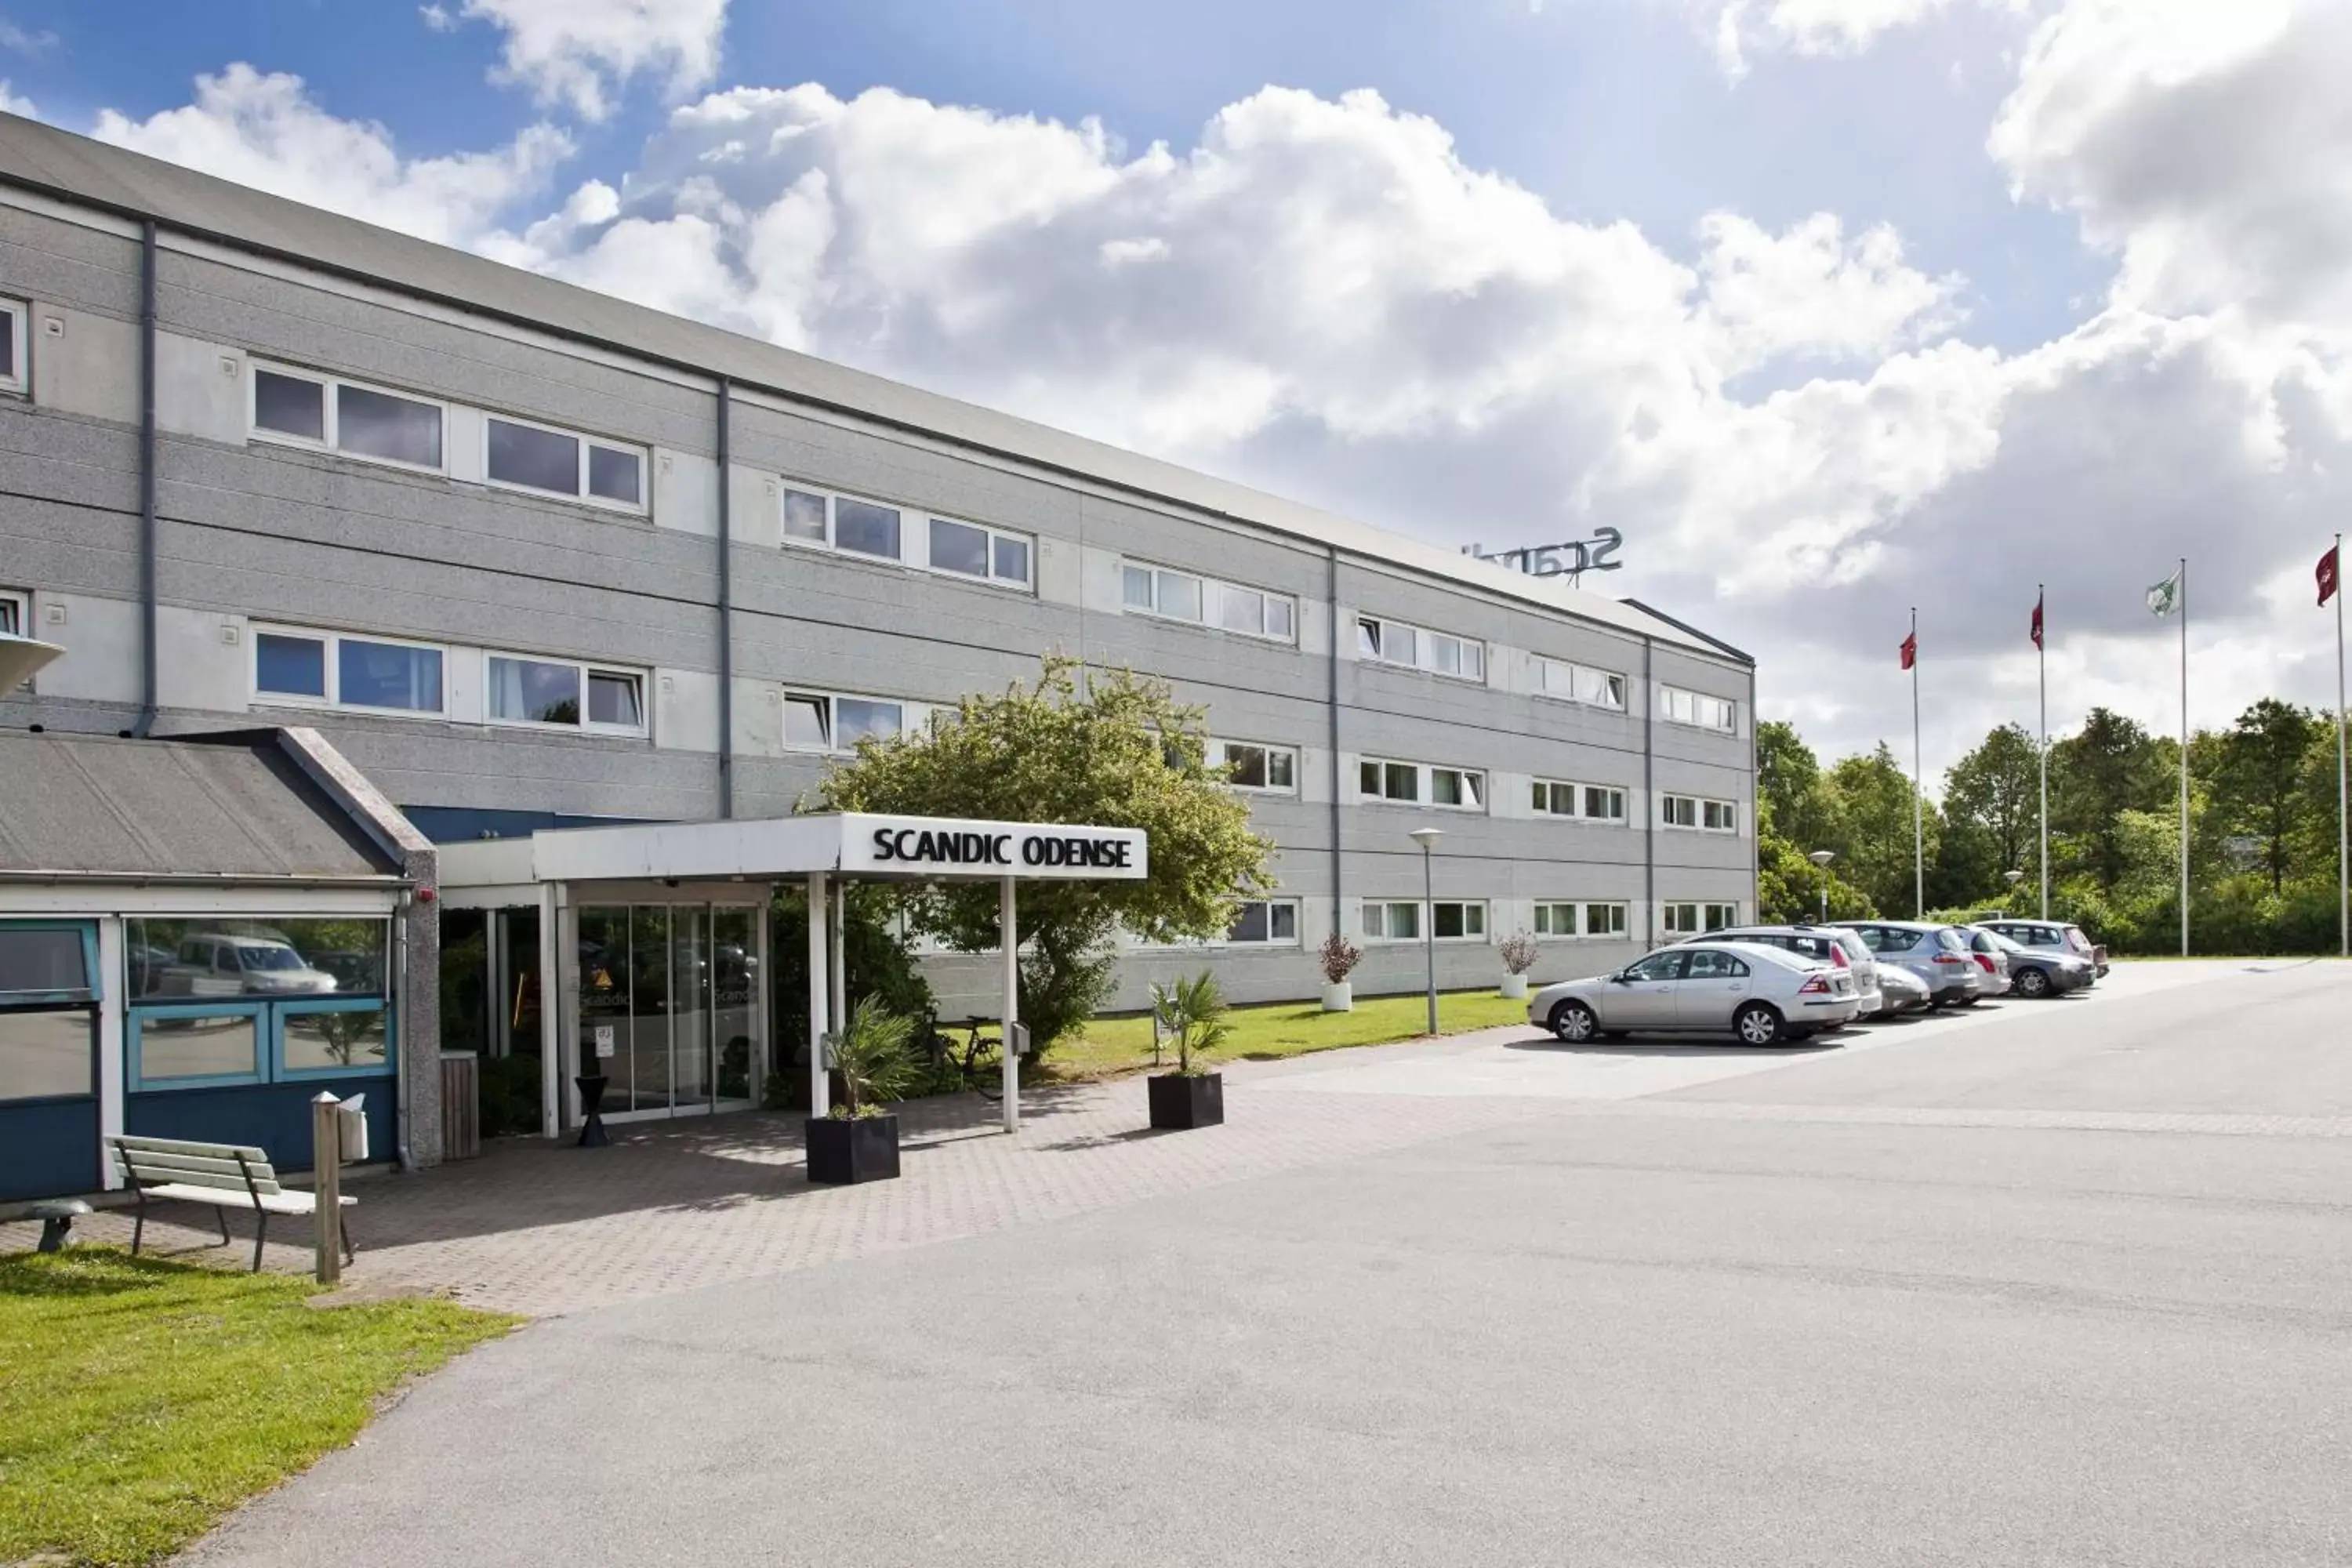 Property Building in Scandic Odense